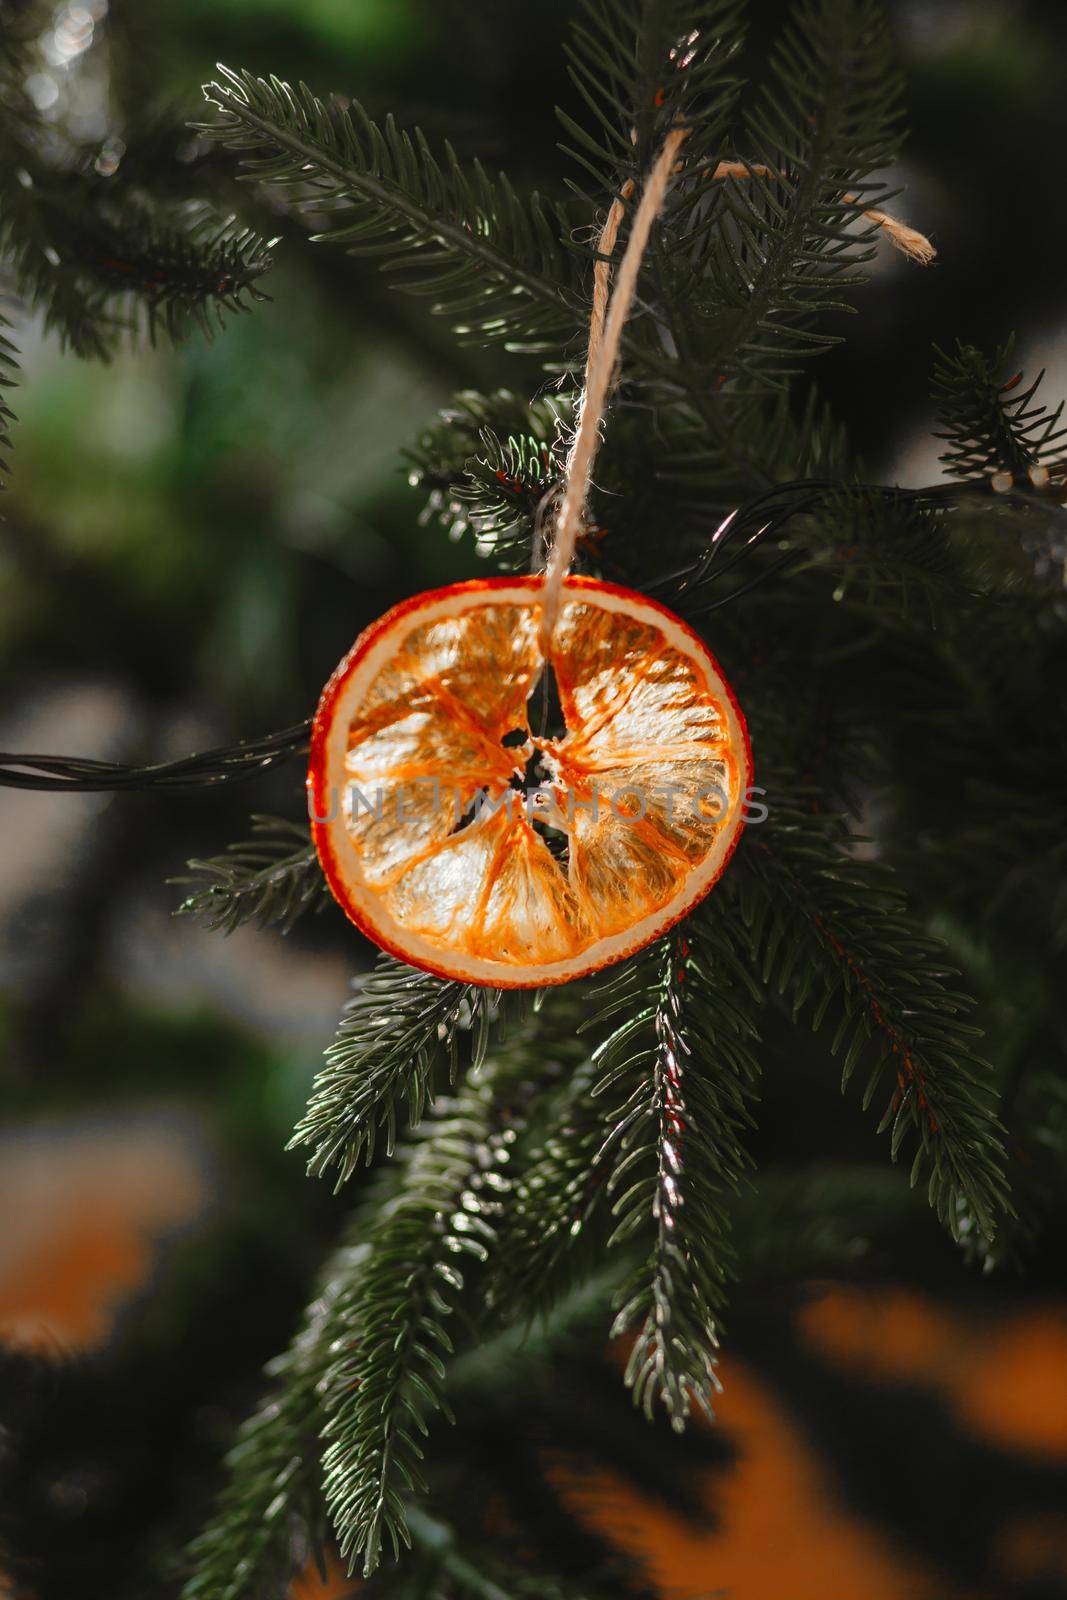 A slice of dried orange hanging on the Christmas tree as a Christmas toy by deandy